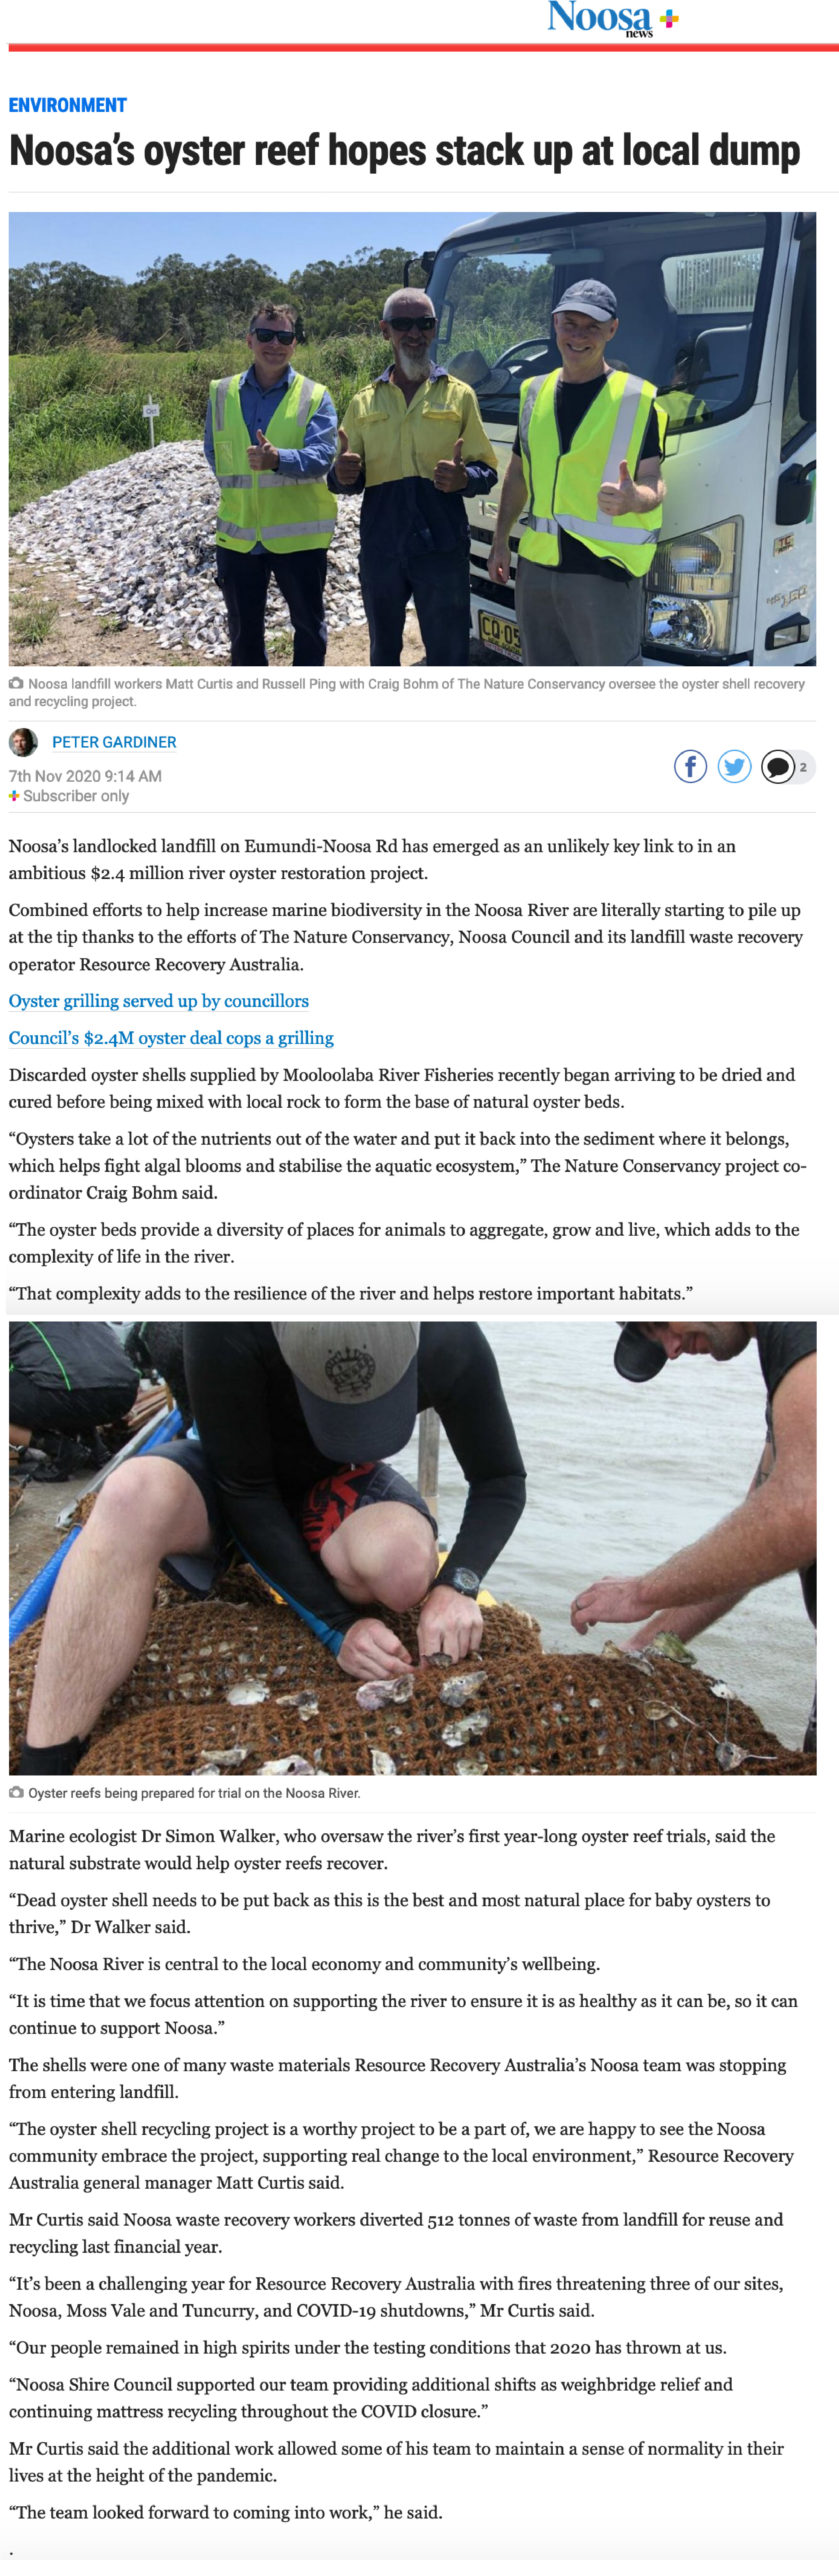 Noosas oyster reef hopes stack up at local dump Noosa news